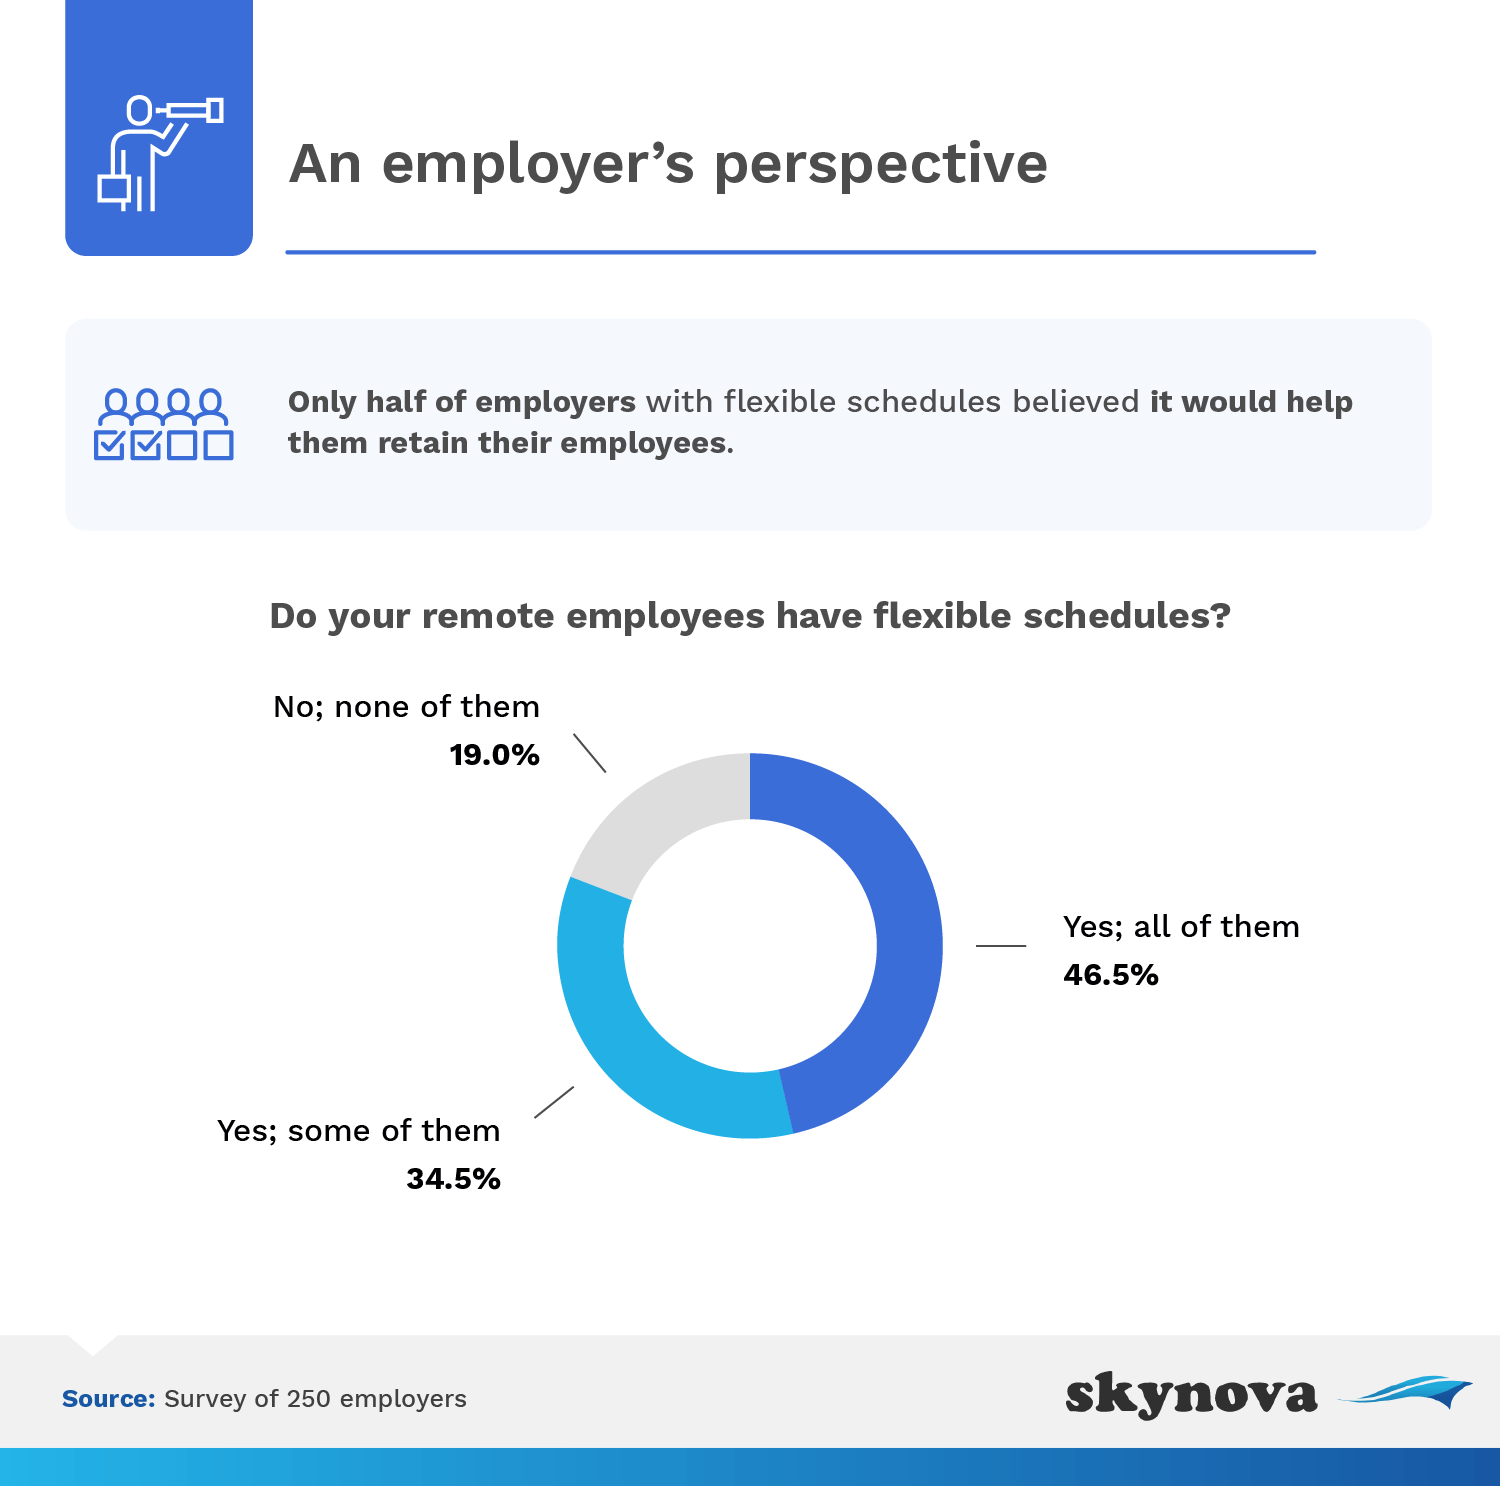 An employer's perspective